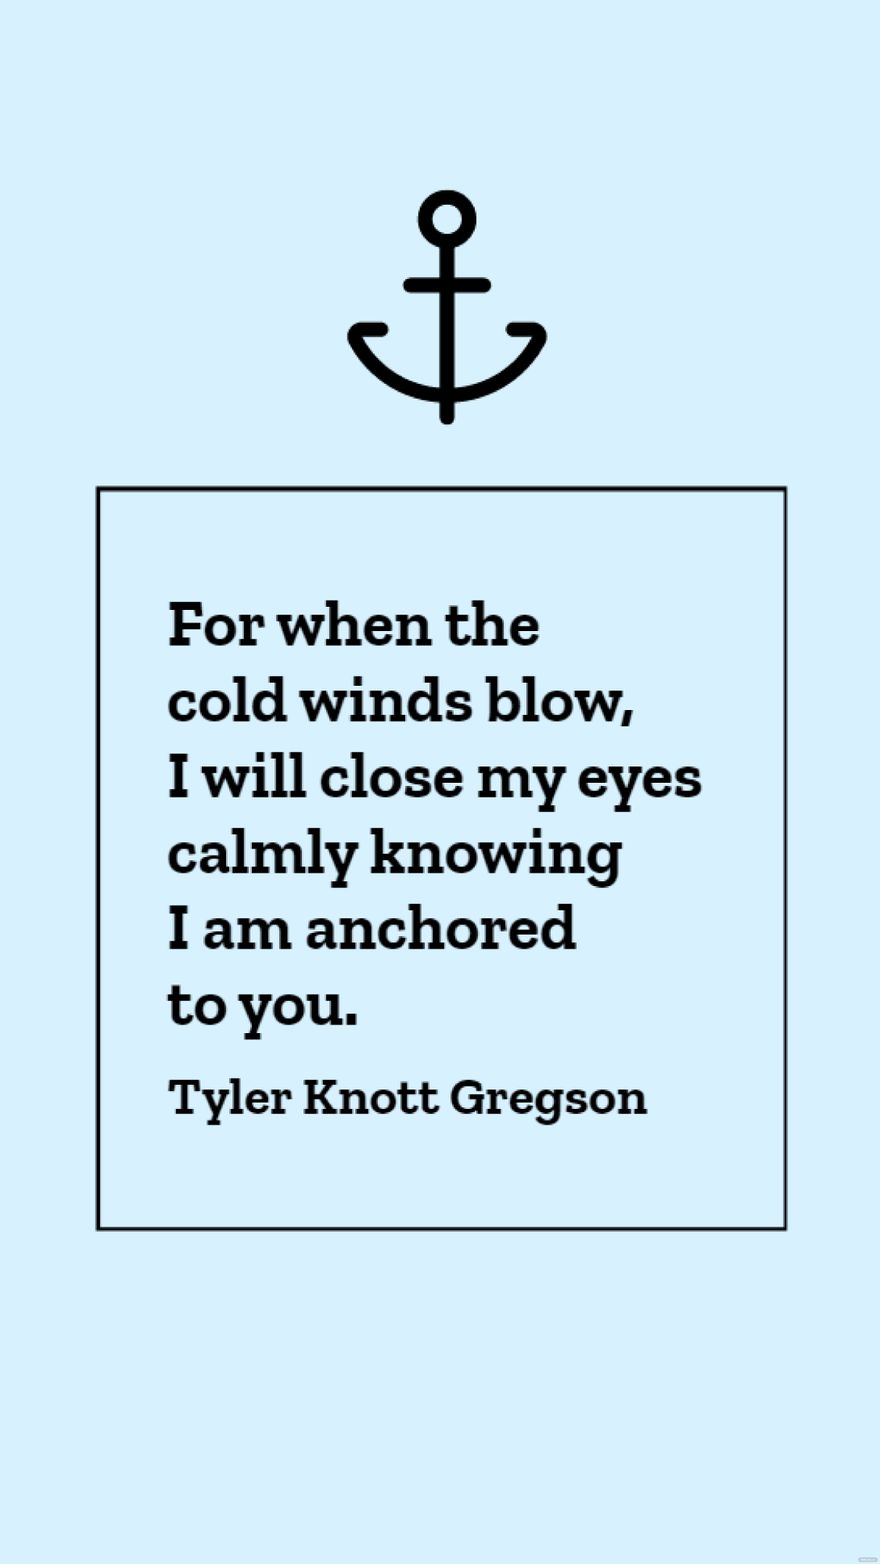 Tyler Knott Gregson - For when the cold winds blow, I will close my eyes calmly knowing I am anchored to you. in JPG